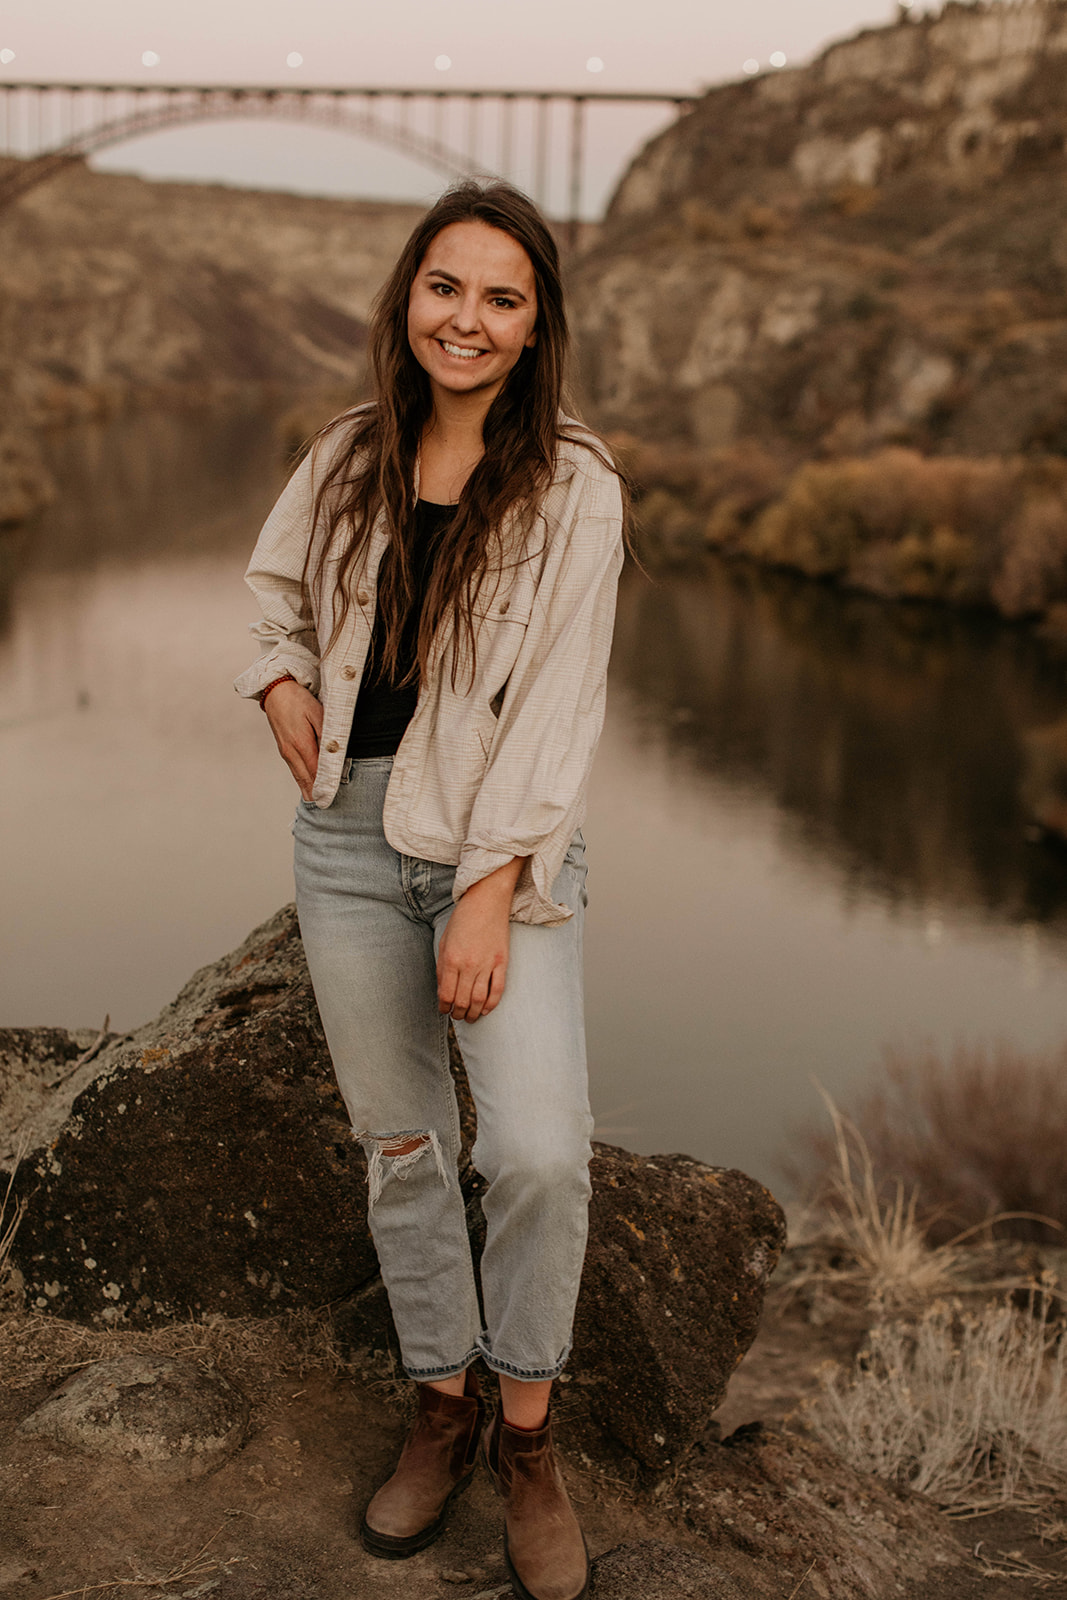 Morgan Wirth smiles while standing in front of a lake and bridge during a photography workshop.